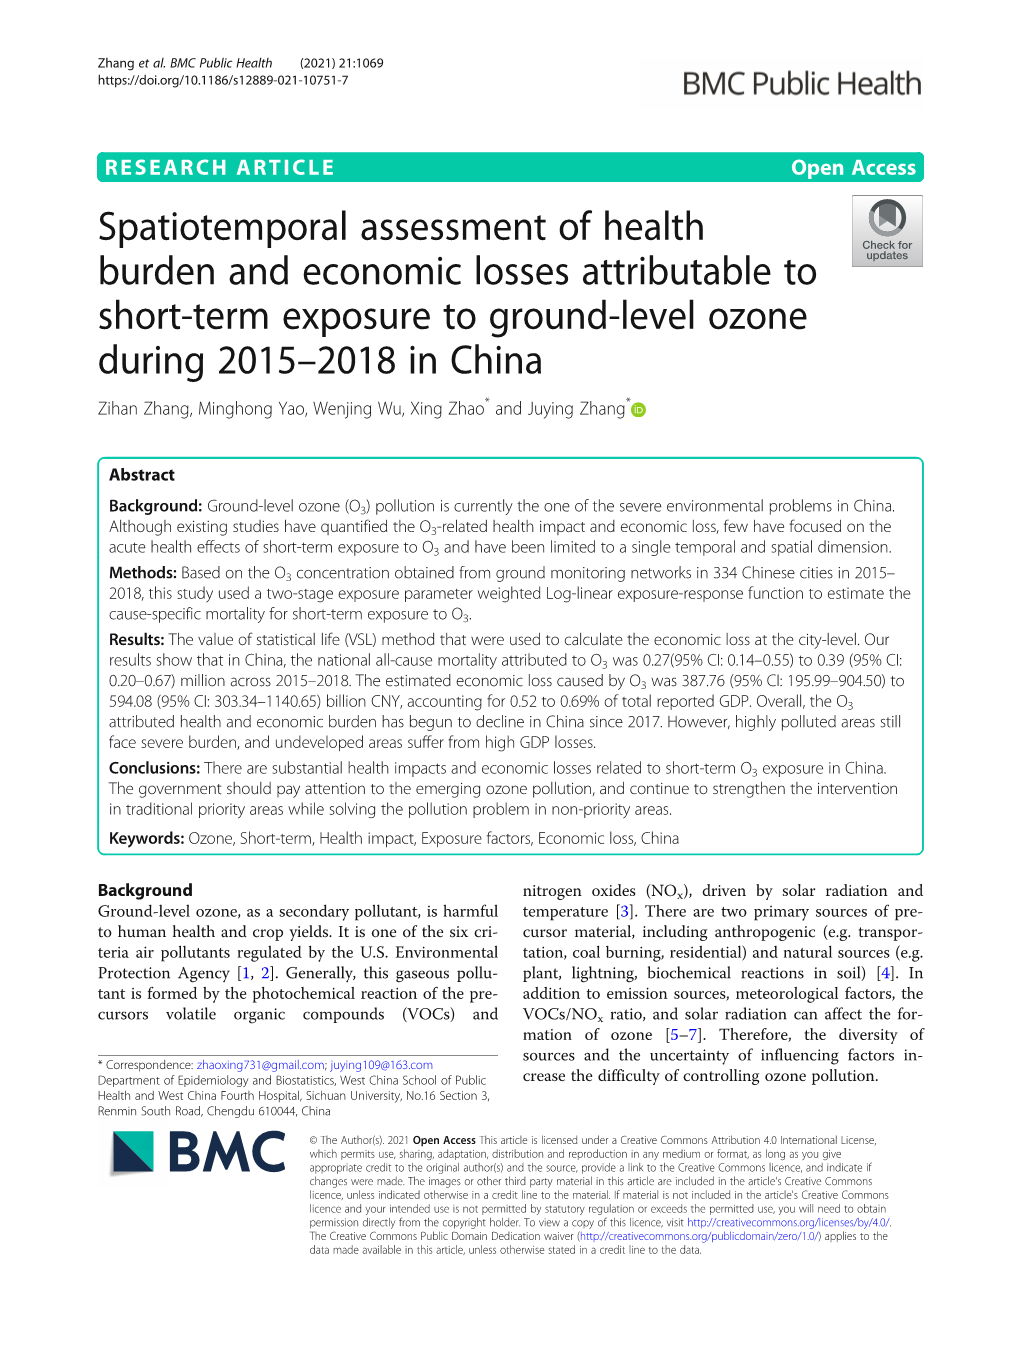 Spatiotemporal Assessment of Health Burden and Economic Losses